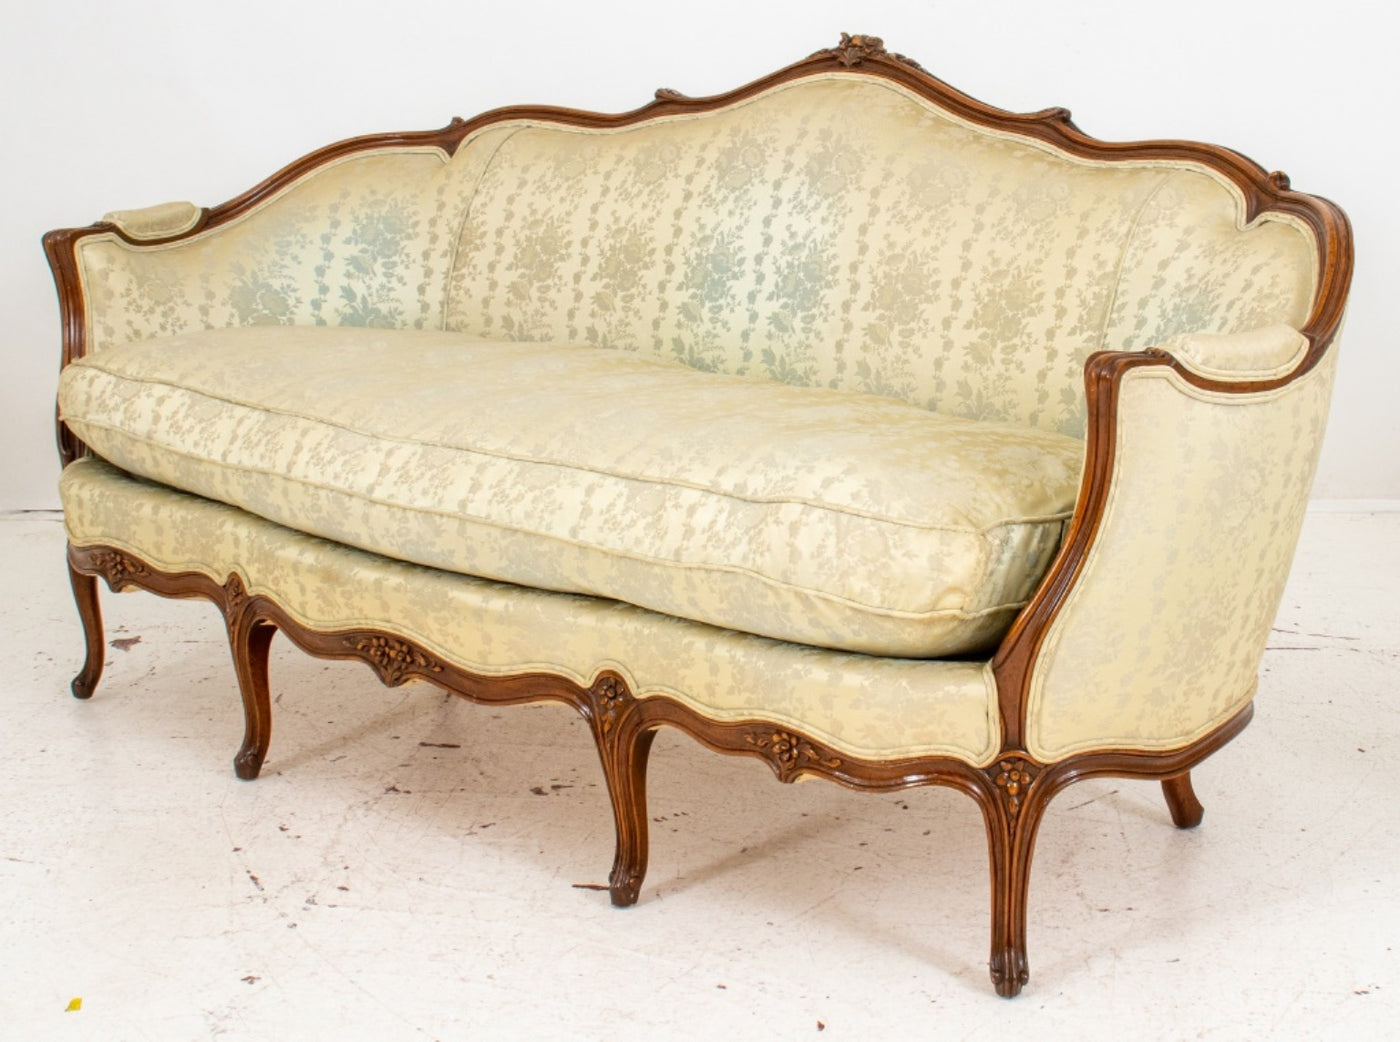 Louis XV style, French Furniture, Rococo & Ornate